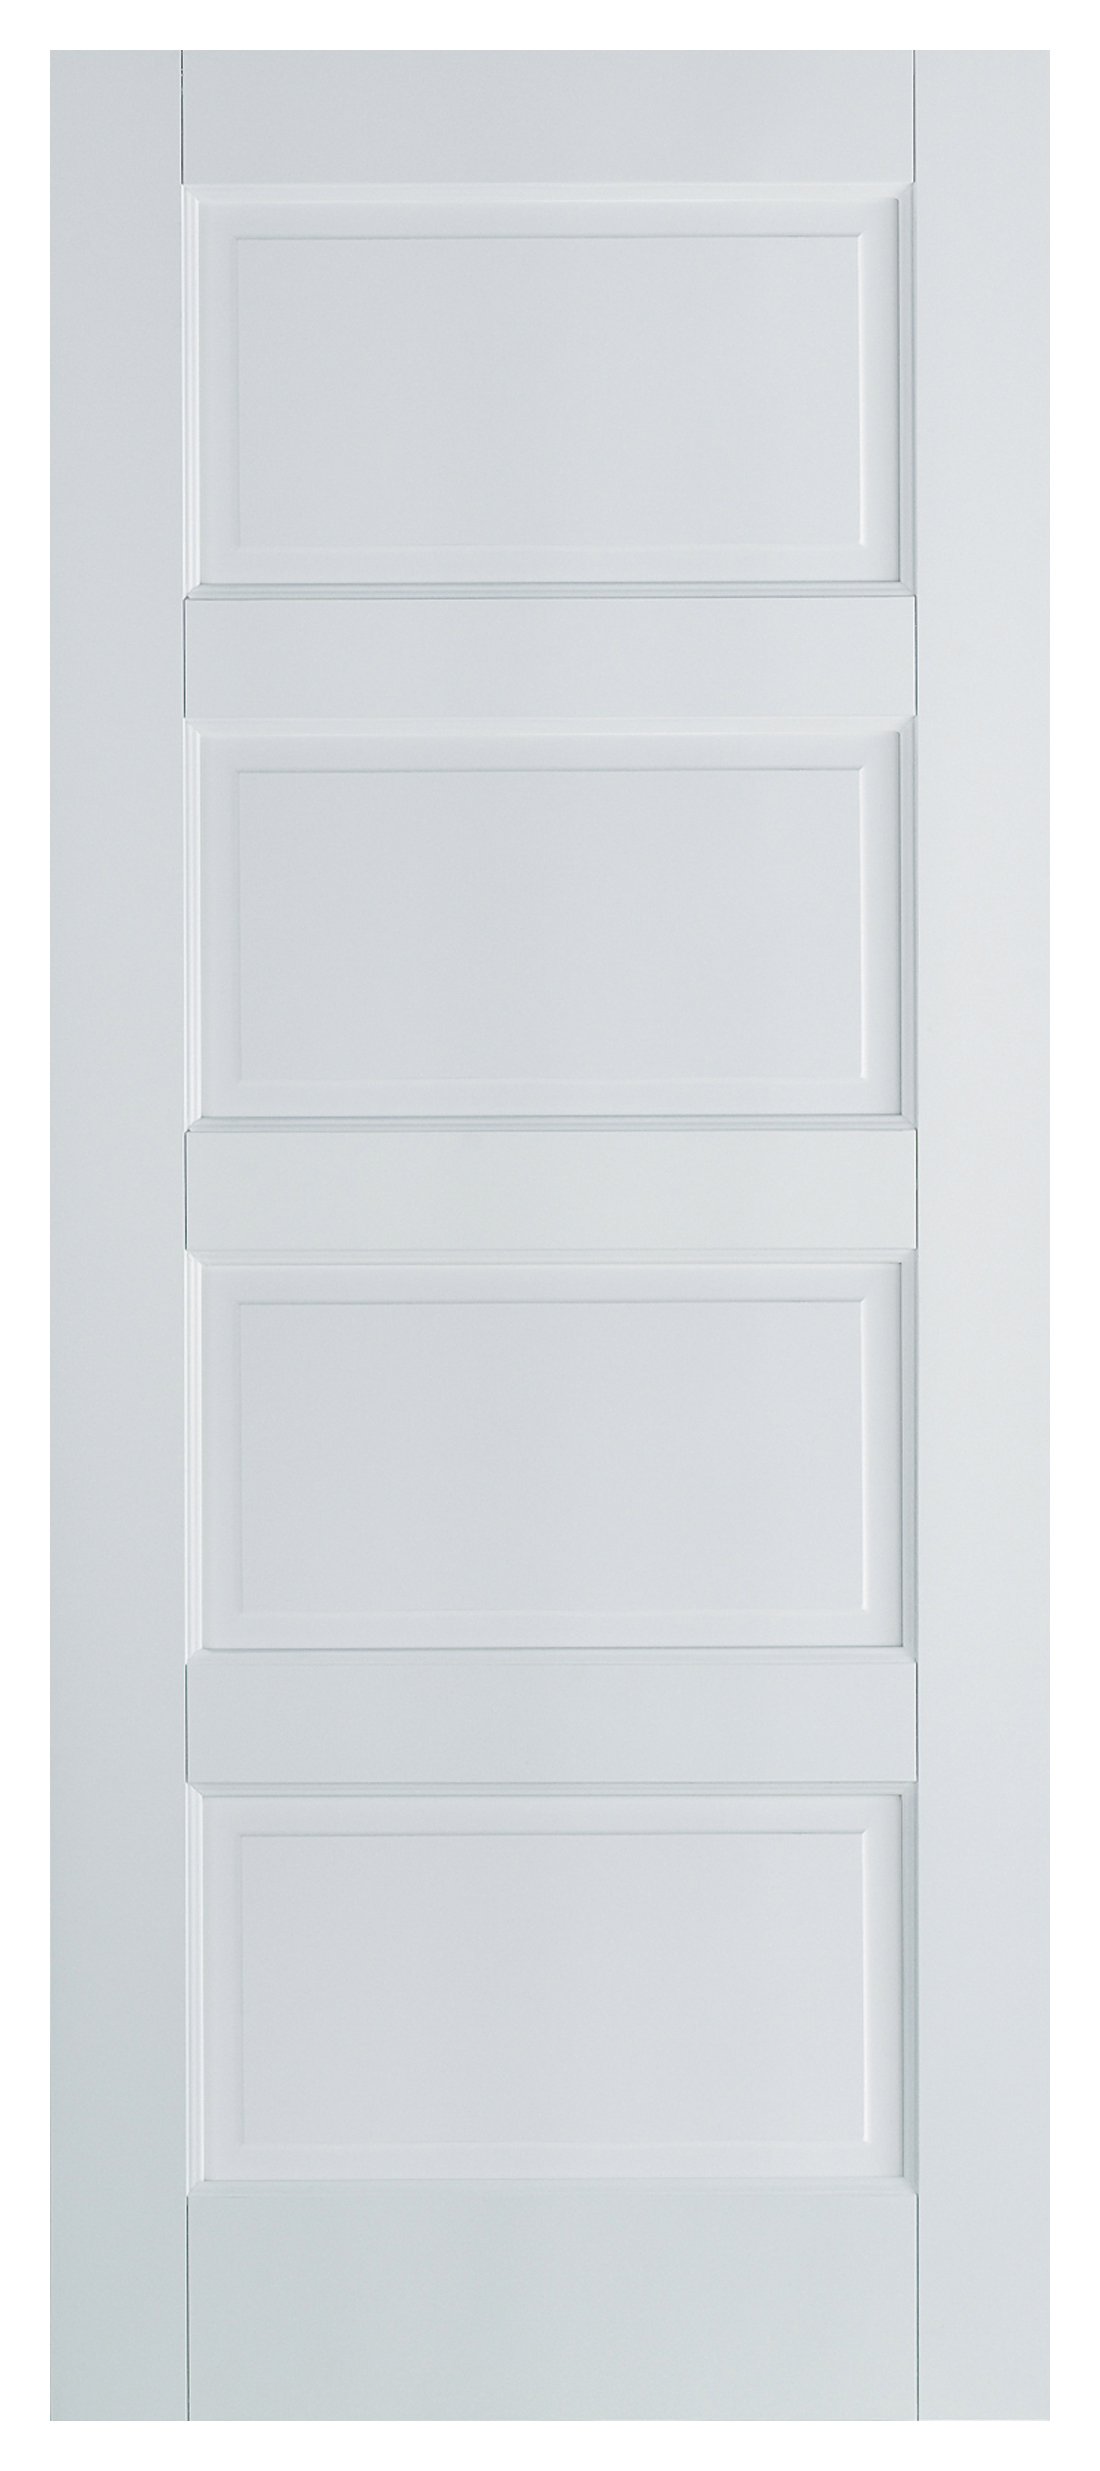 Image of LPD Internal Contemporary 4 Panel Primed White FD30 Fire Door - 762 x 1981mm